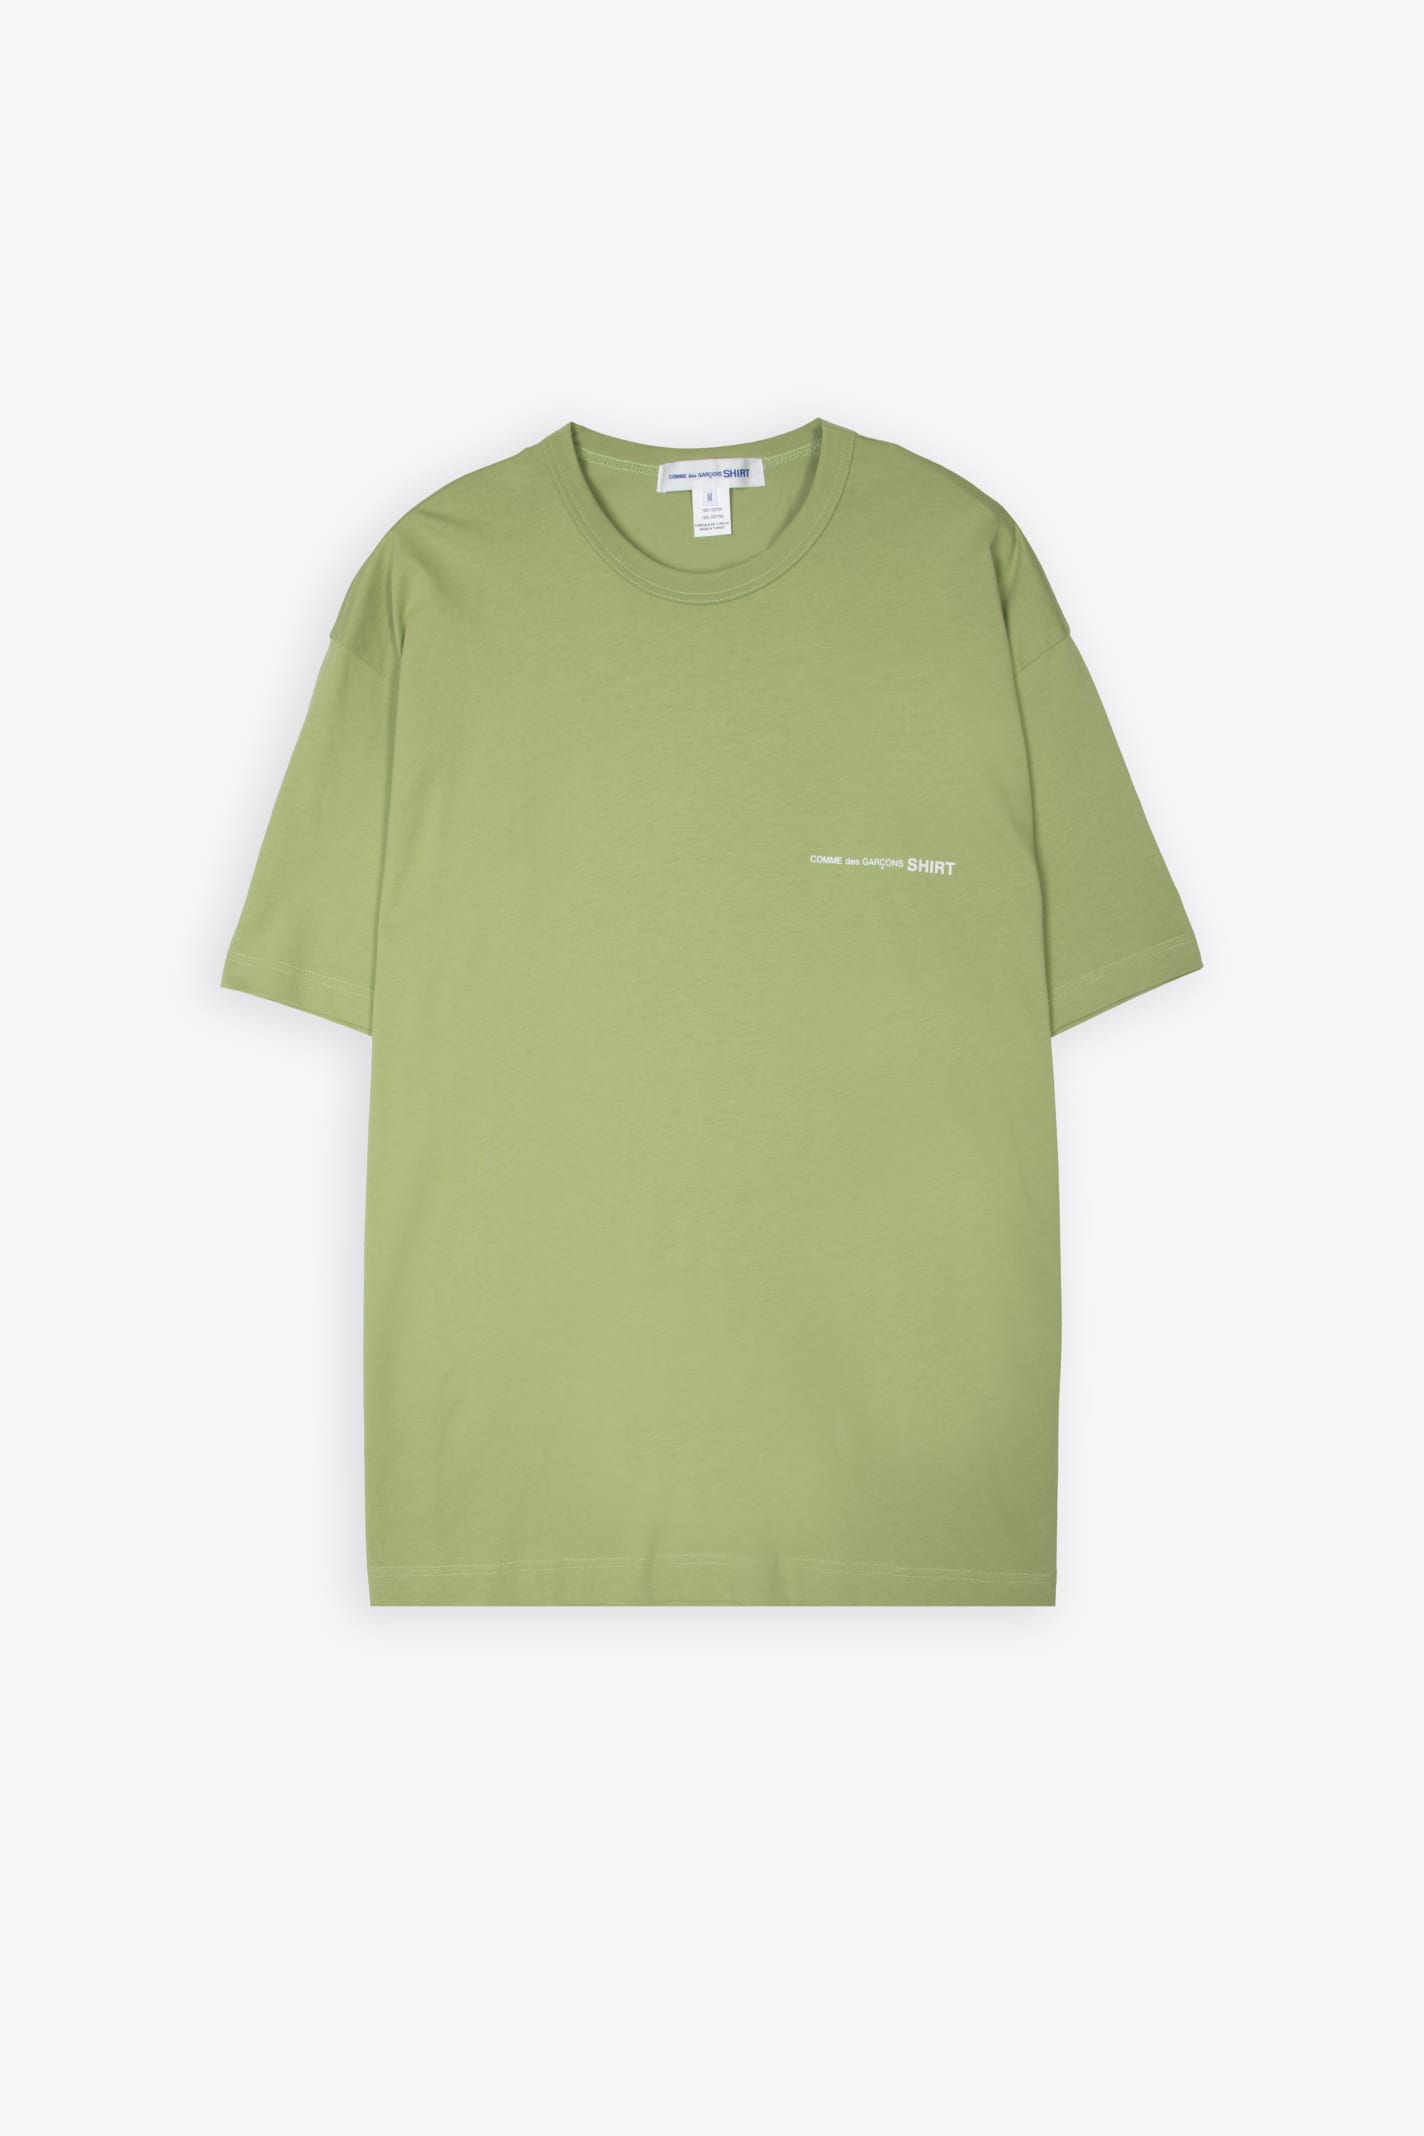 Mens T-shirt Knit Green cotton oversize t-shirt with chest logo